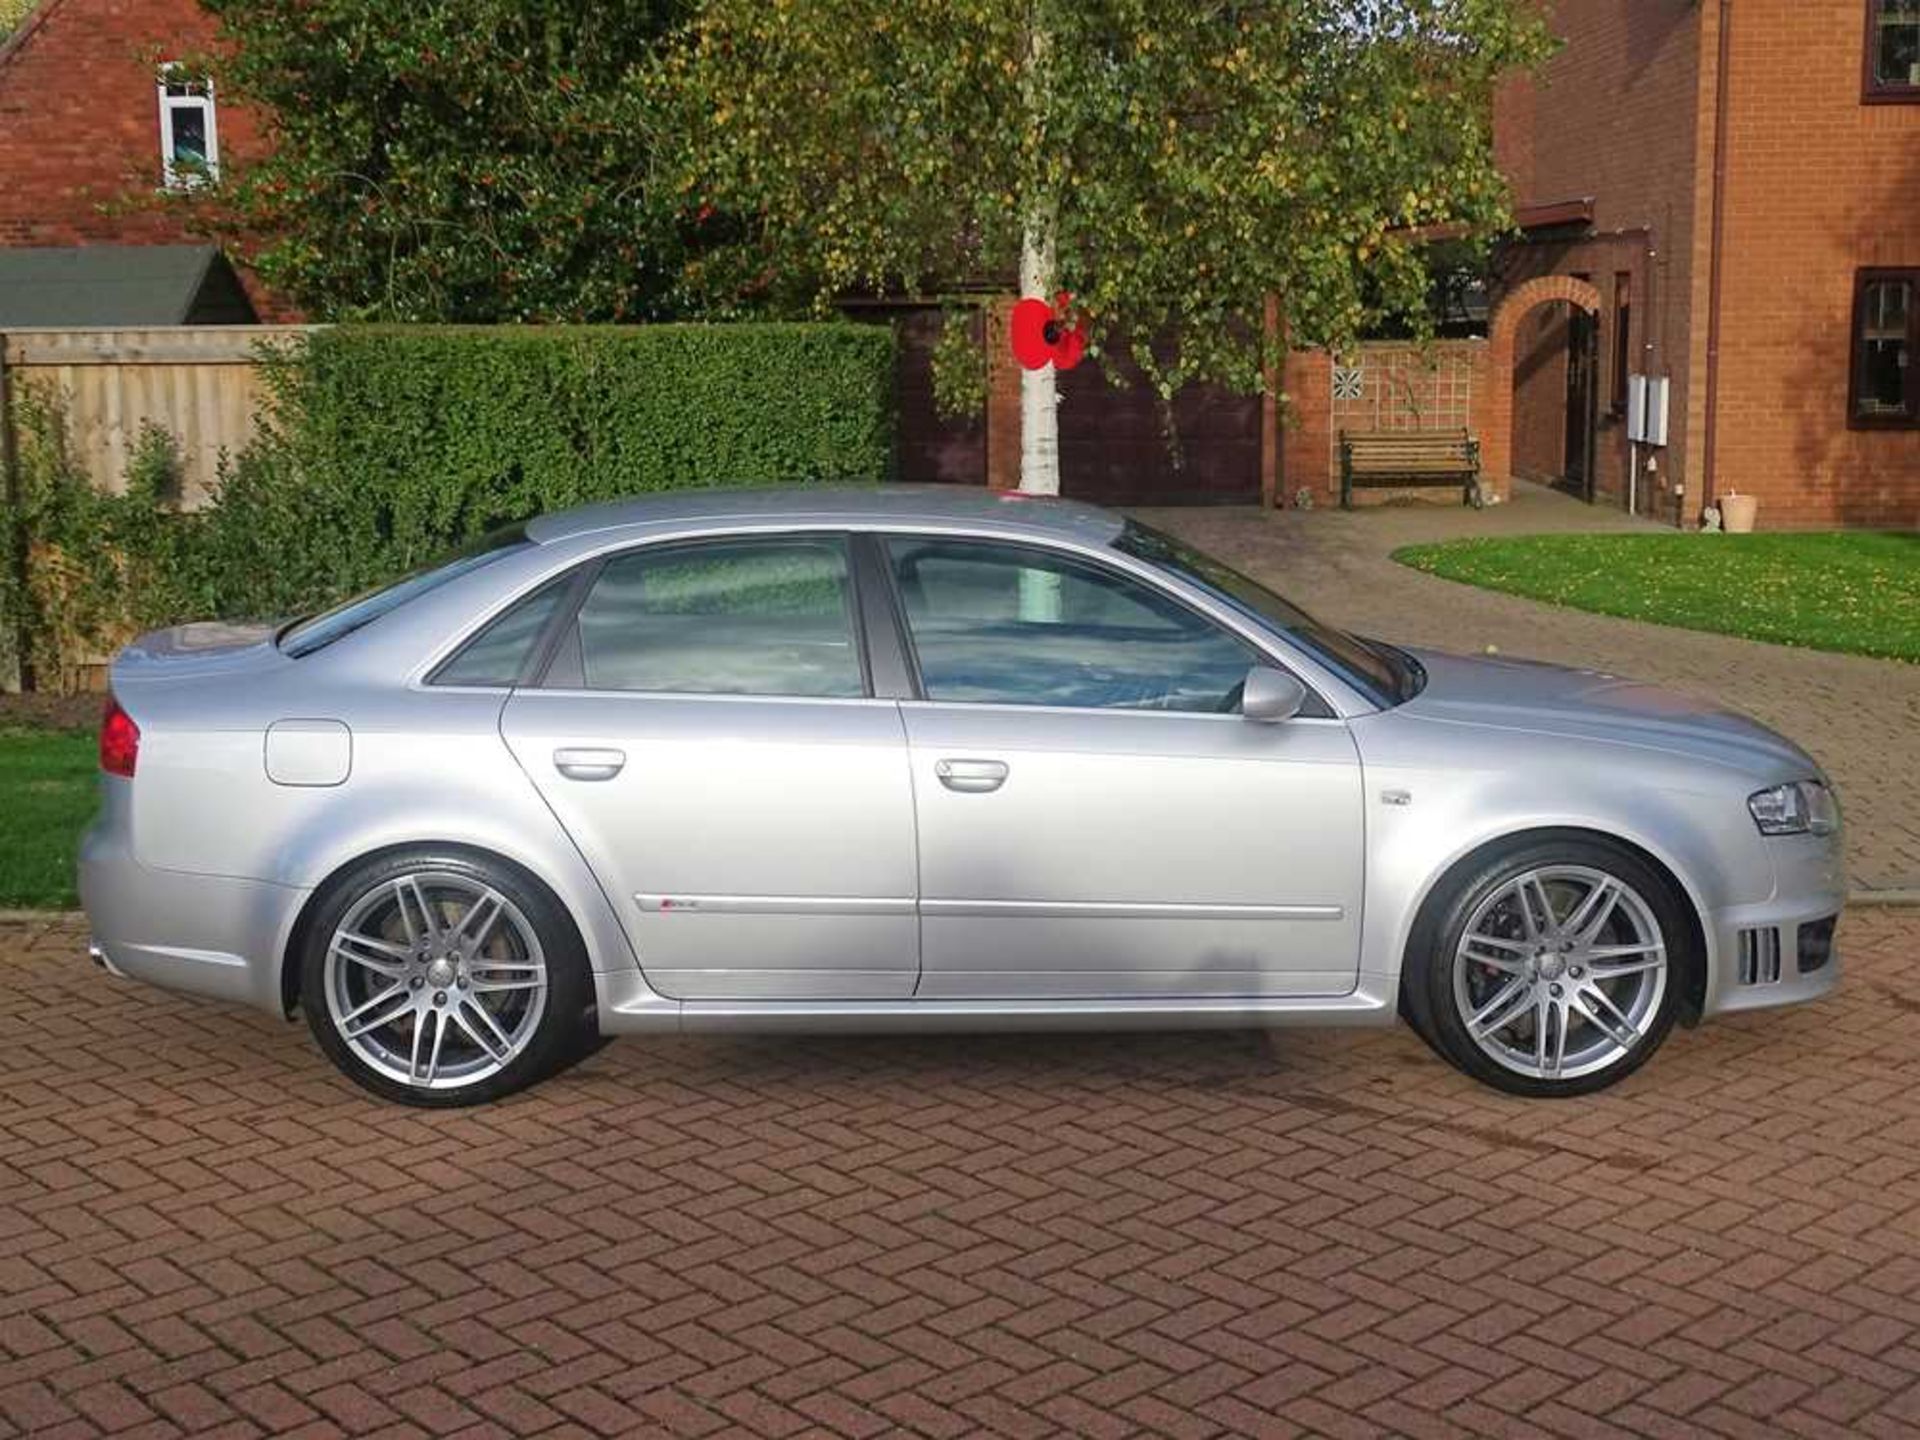 2007 Audi RS4 Saloon One owner and just c.60,000 miles from new - Image 73 of 86